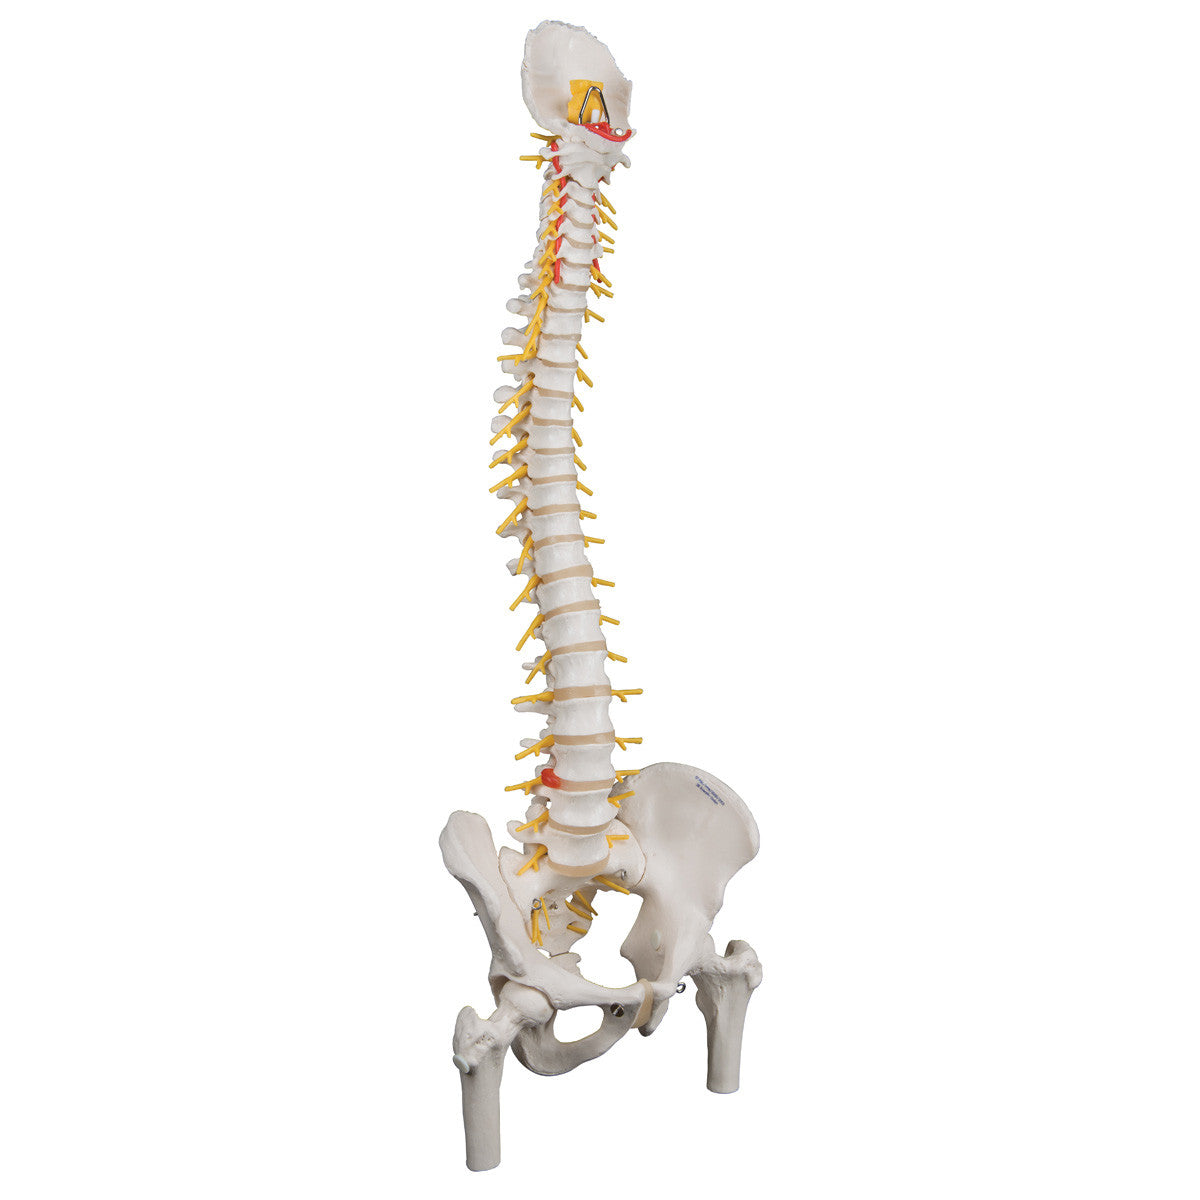 a58-6_02_1200_1200_deluxe-flexible-human-spine-model-with-femur-heads-sacral-opening-3b-smart-anatomy__32380.1589753152.1280.1280.jpg